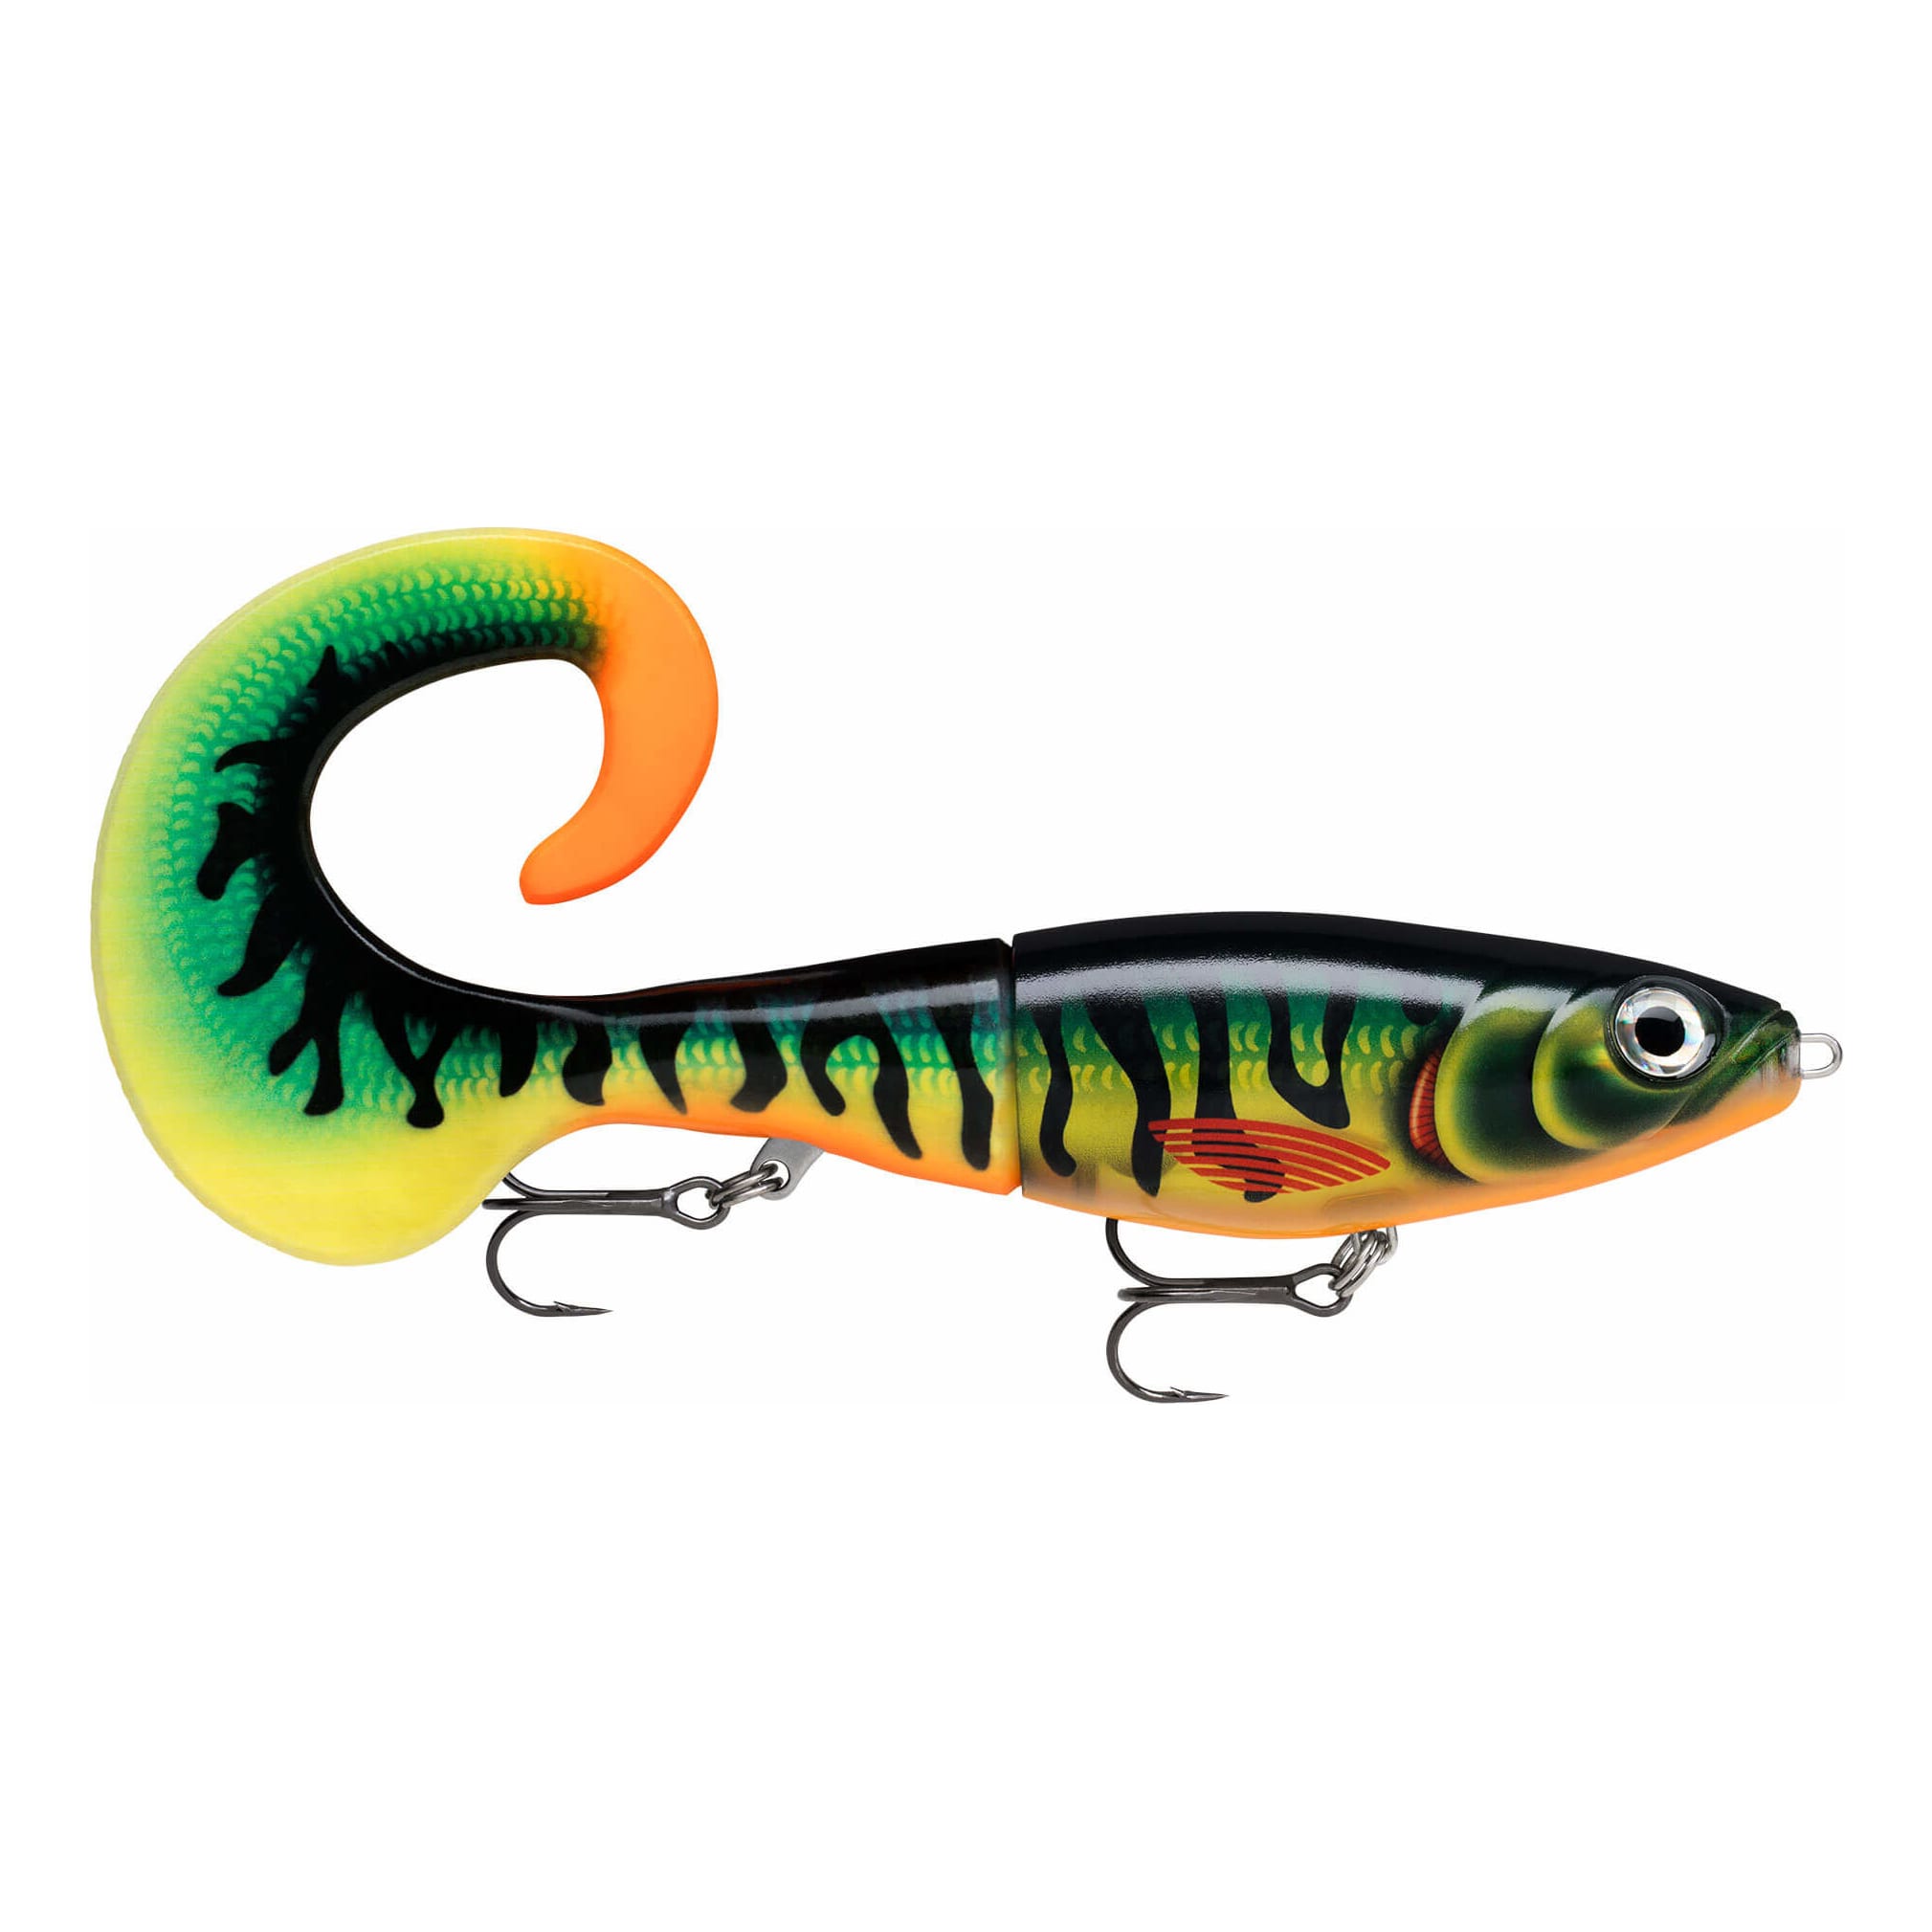 All Freshwater Fishing Baits, Lures Swimbait for sale